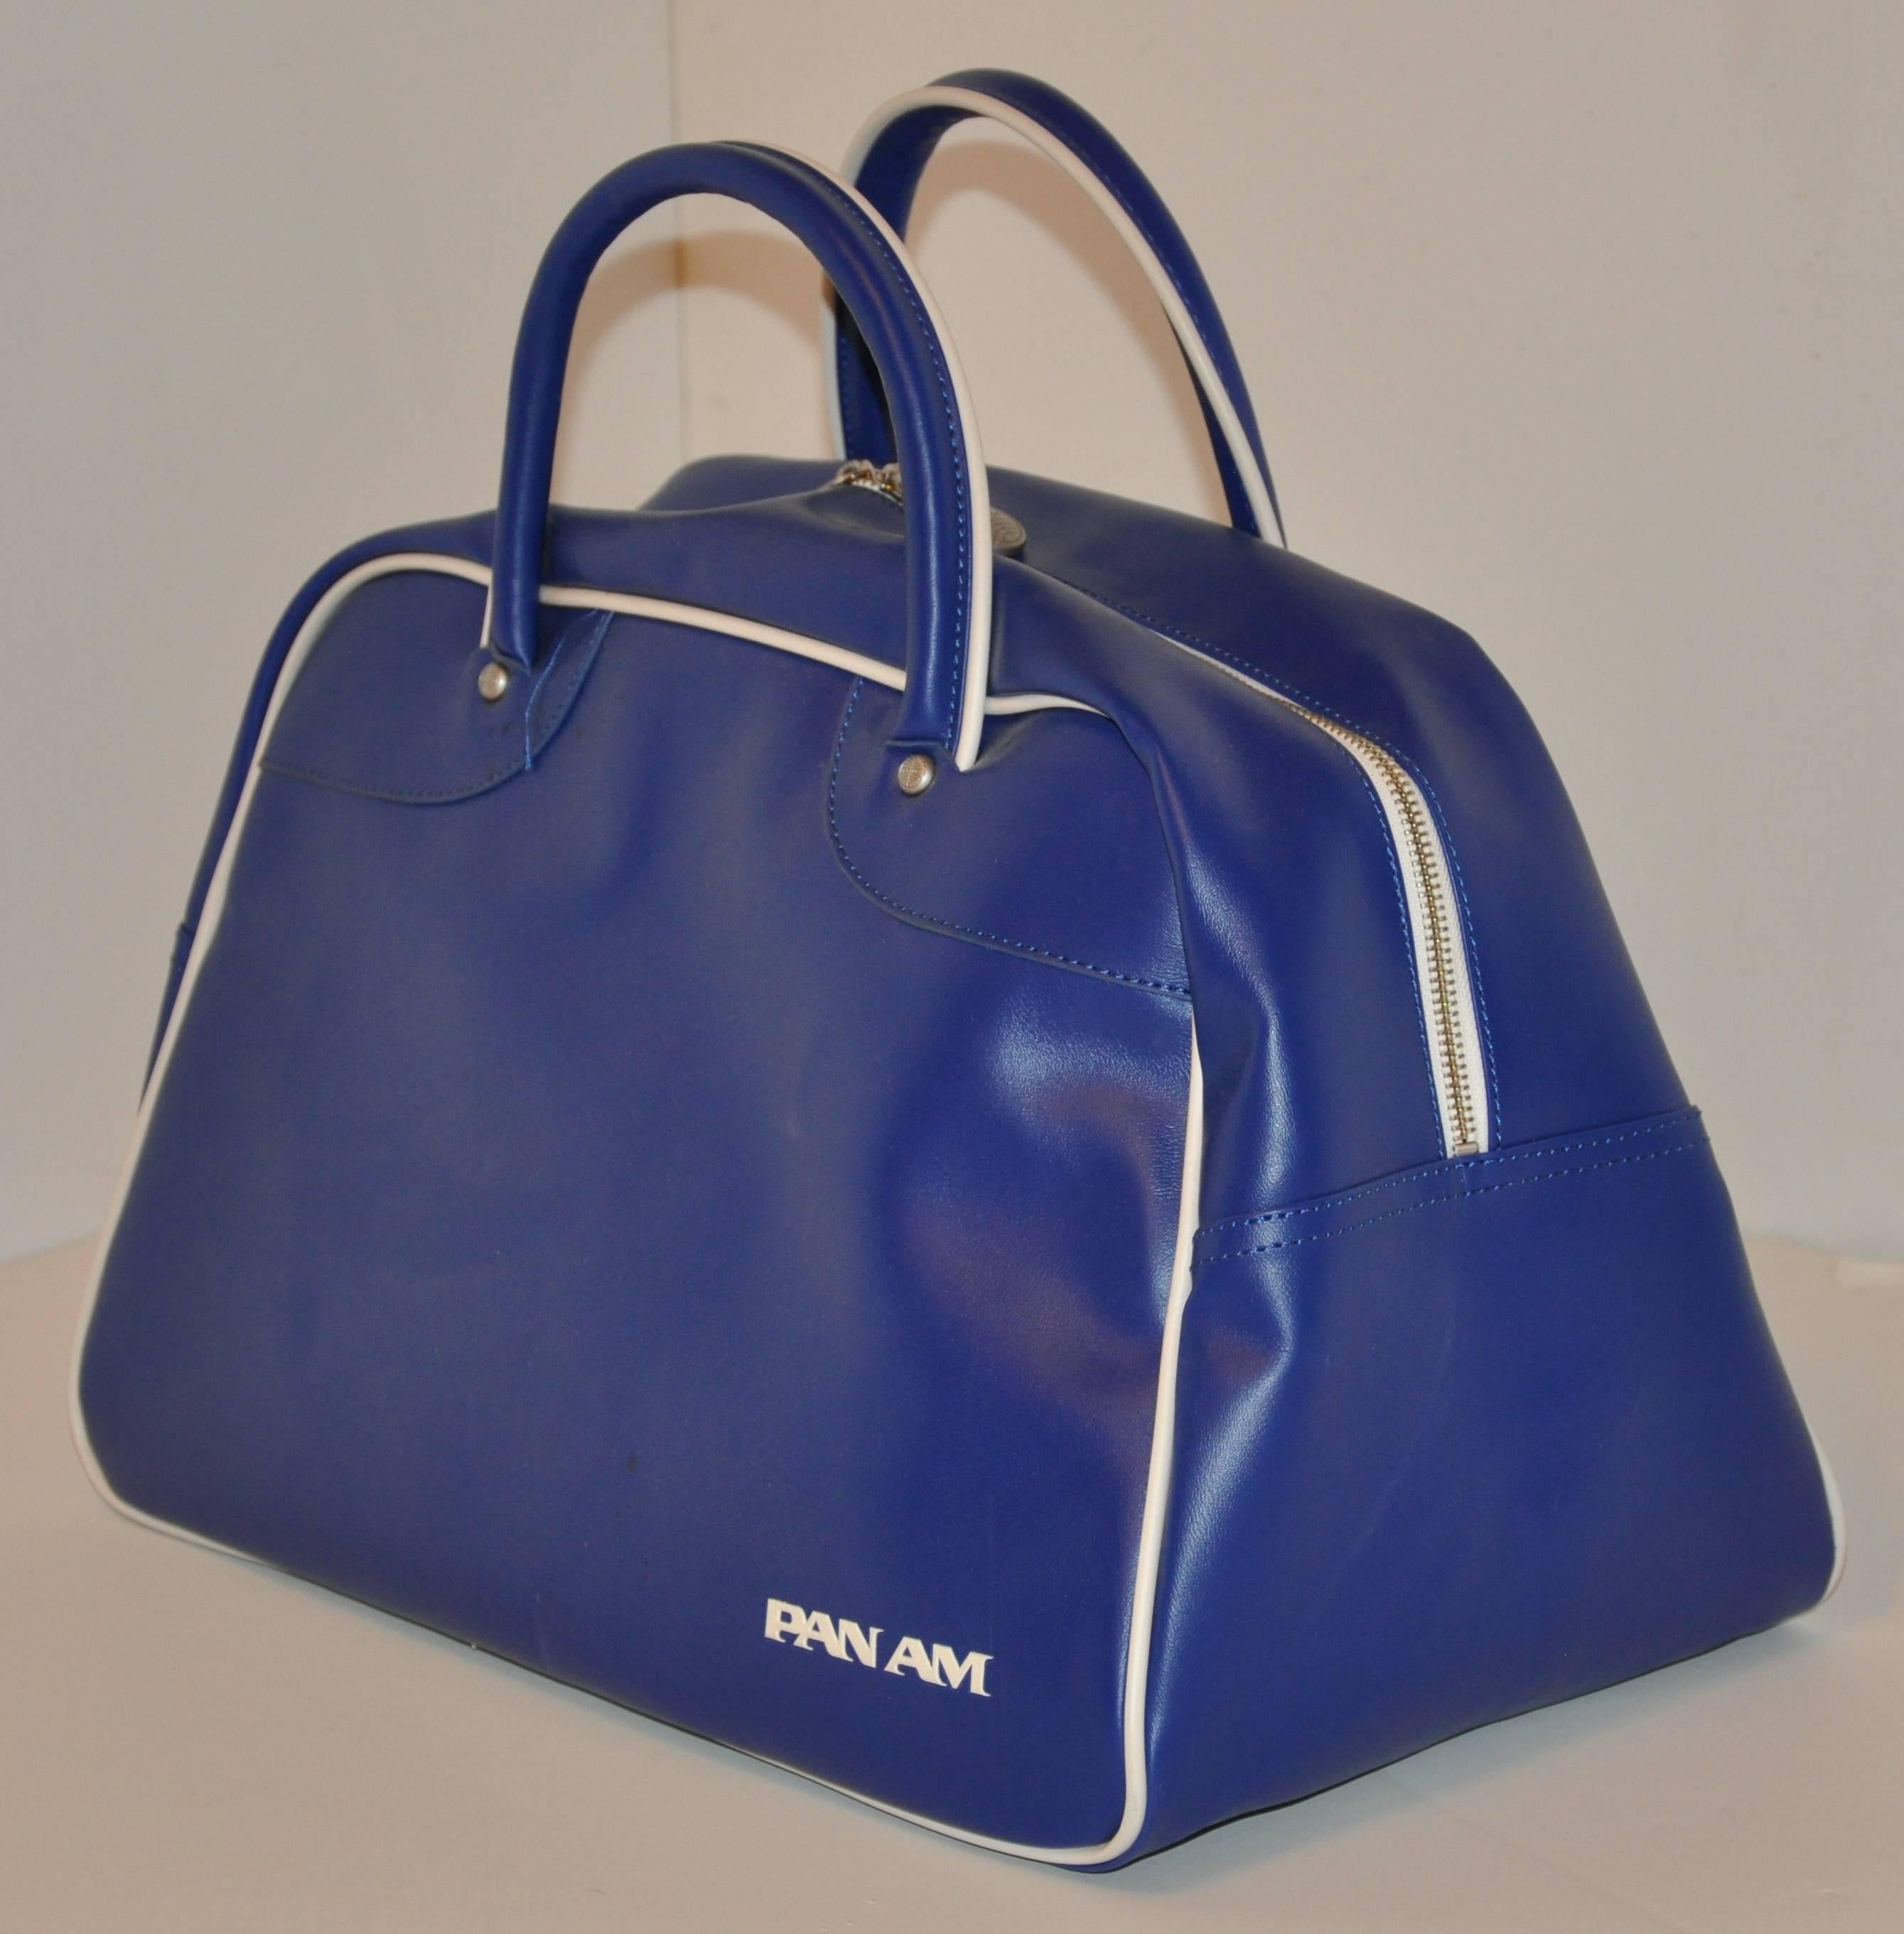         Pan Am's iconic signature navy & white zipper top travel tote is detailed with silver hardware studs engraved with their logo on all four ends of the double handles as well as silver hardware tabs with their 